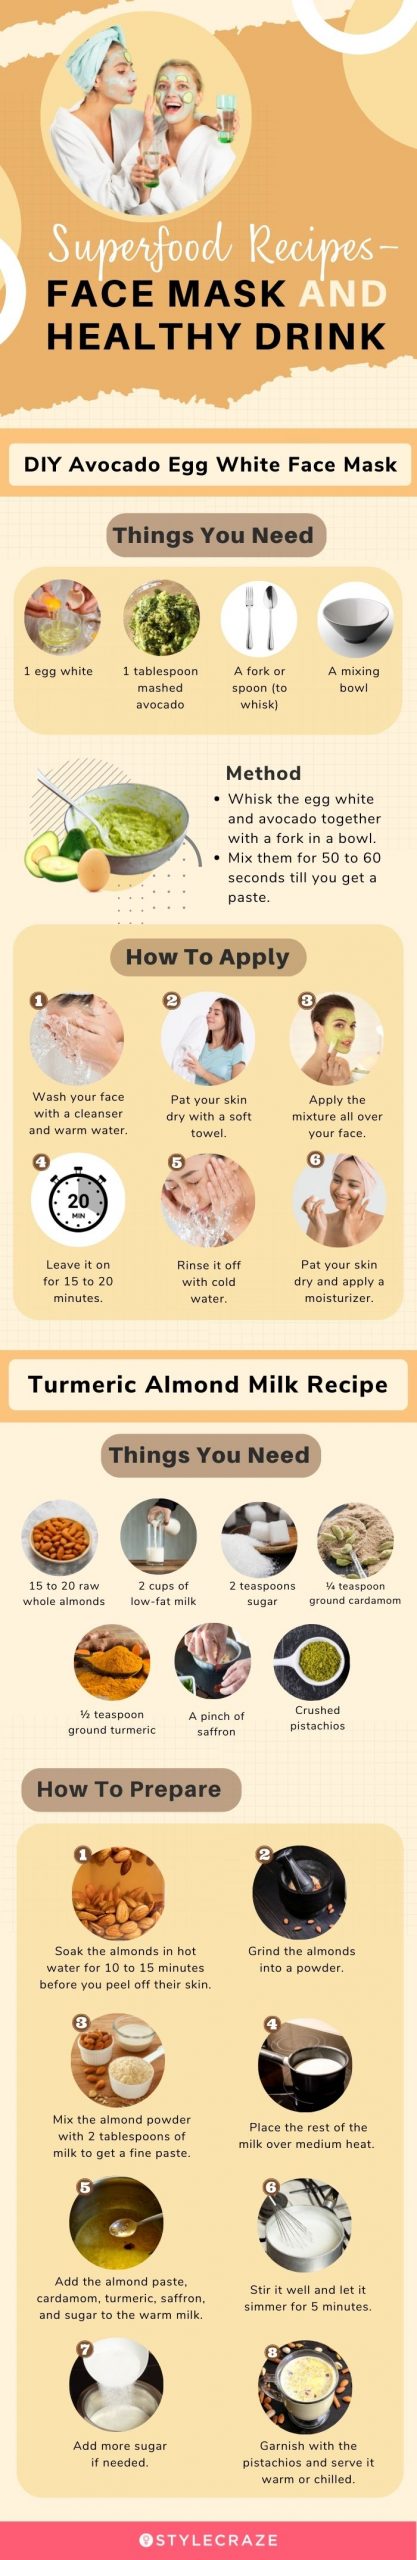 superfood recipes face mask and healthy drink [infographic]